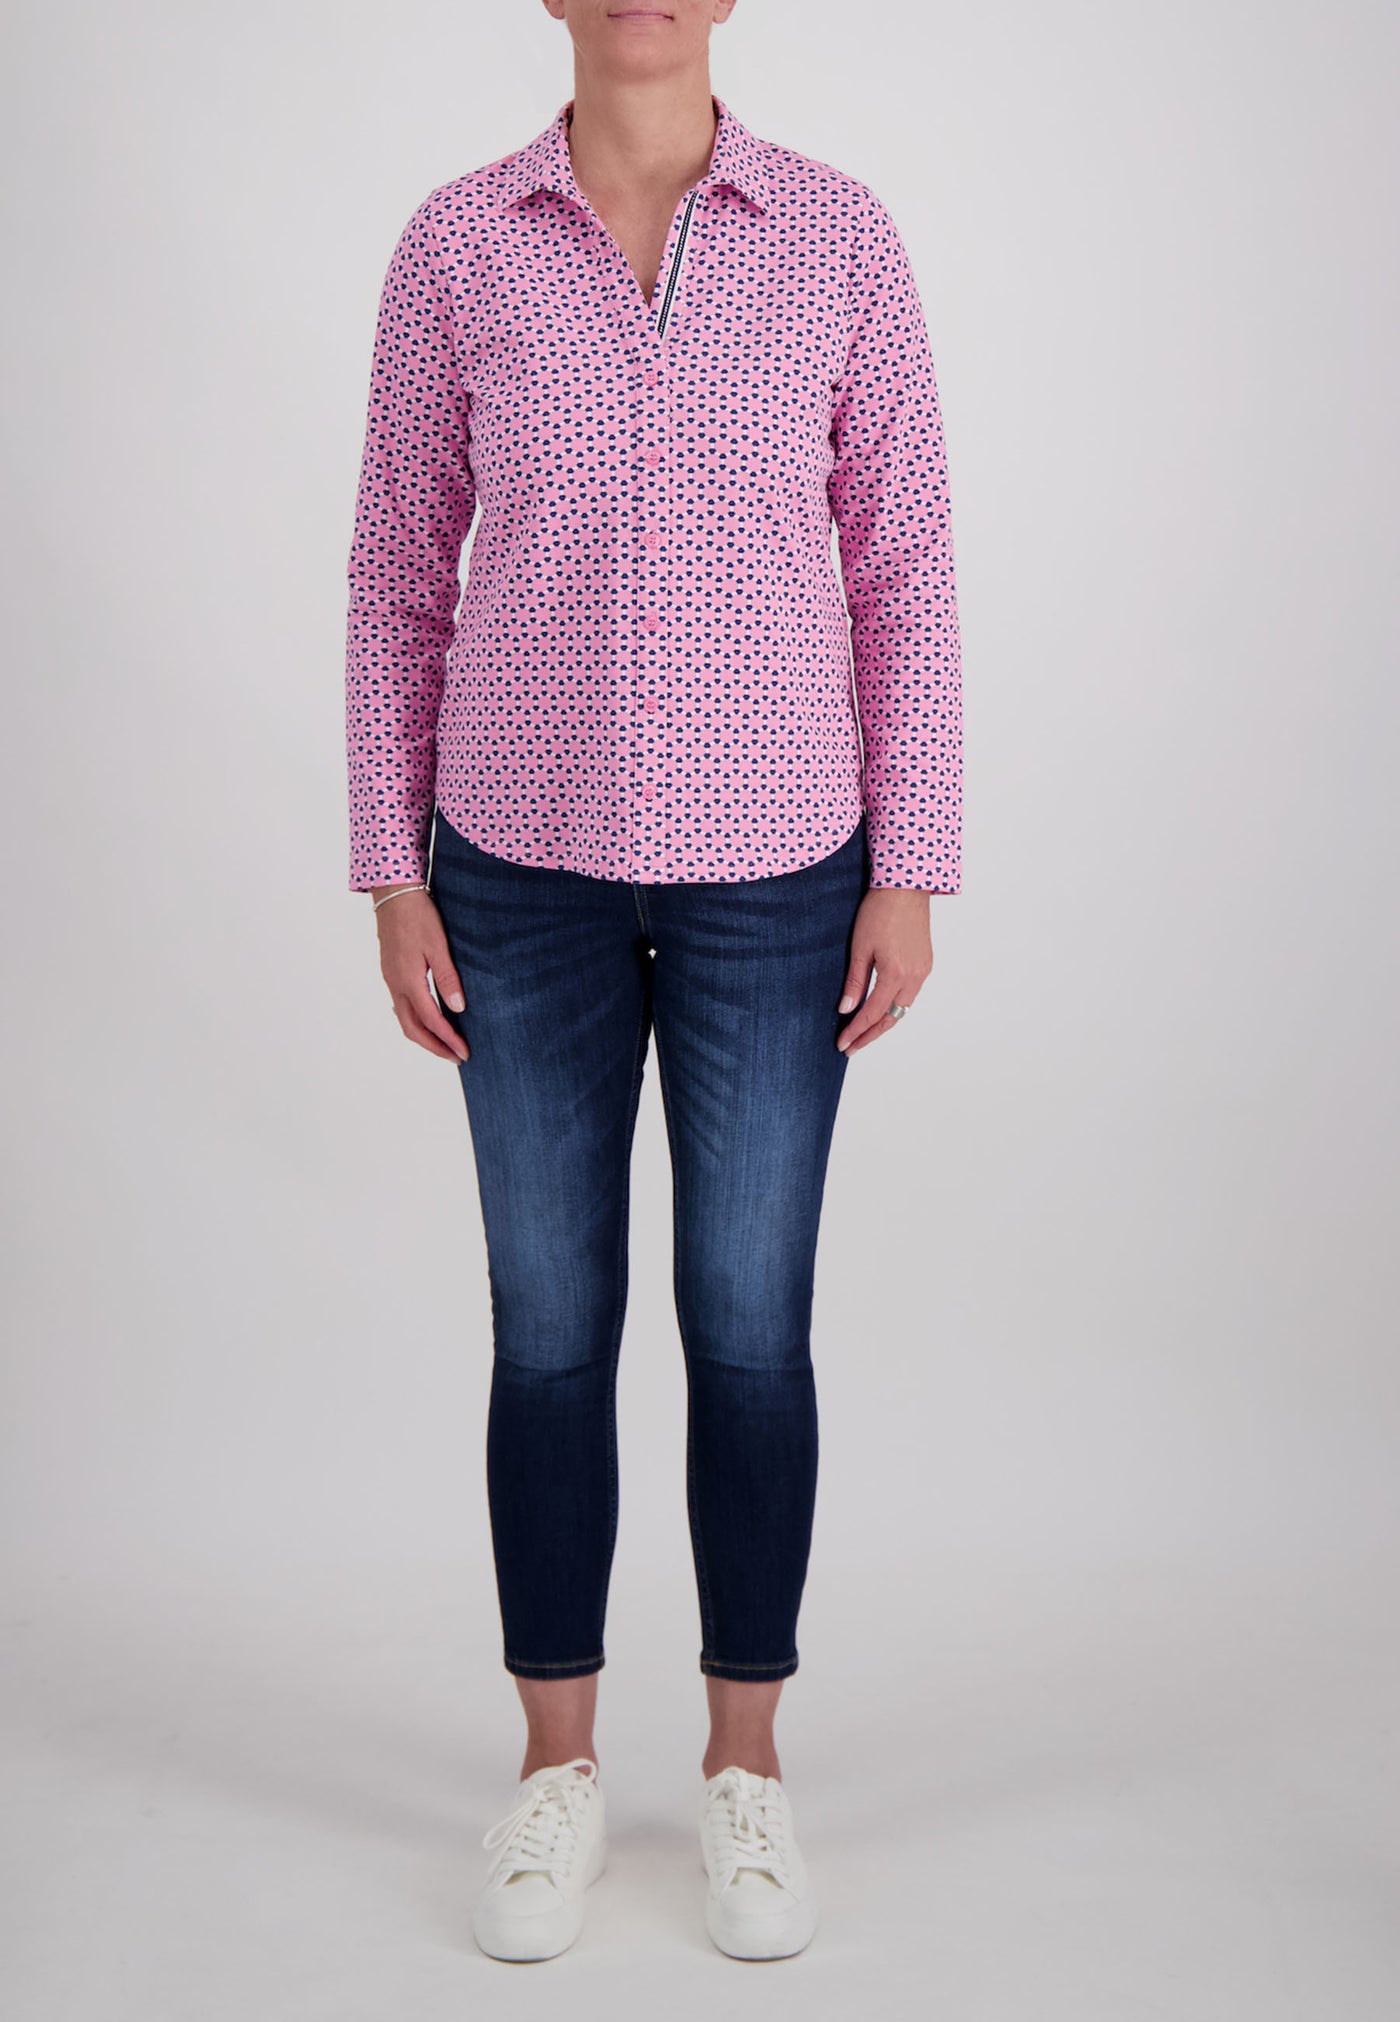 Pink,& Navy Geometic Print Soft Feel Top Button Detail and Collar